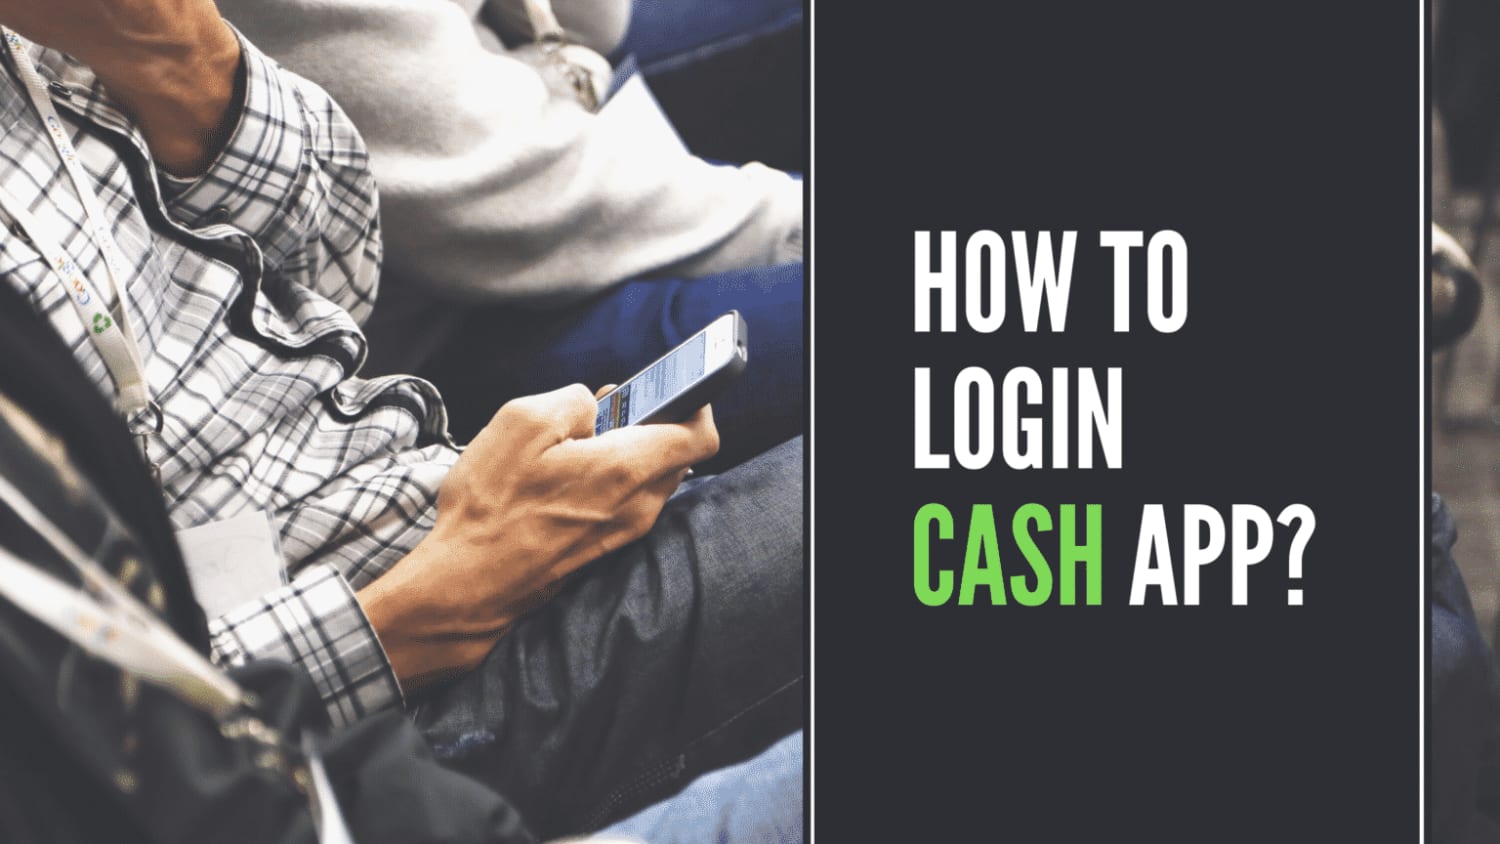 Cash App Login Issue? - Check Out The Steps Here - [FIXED]